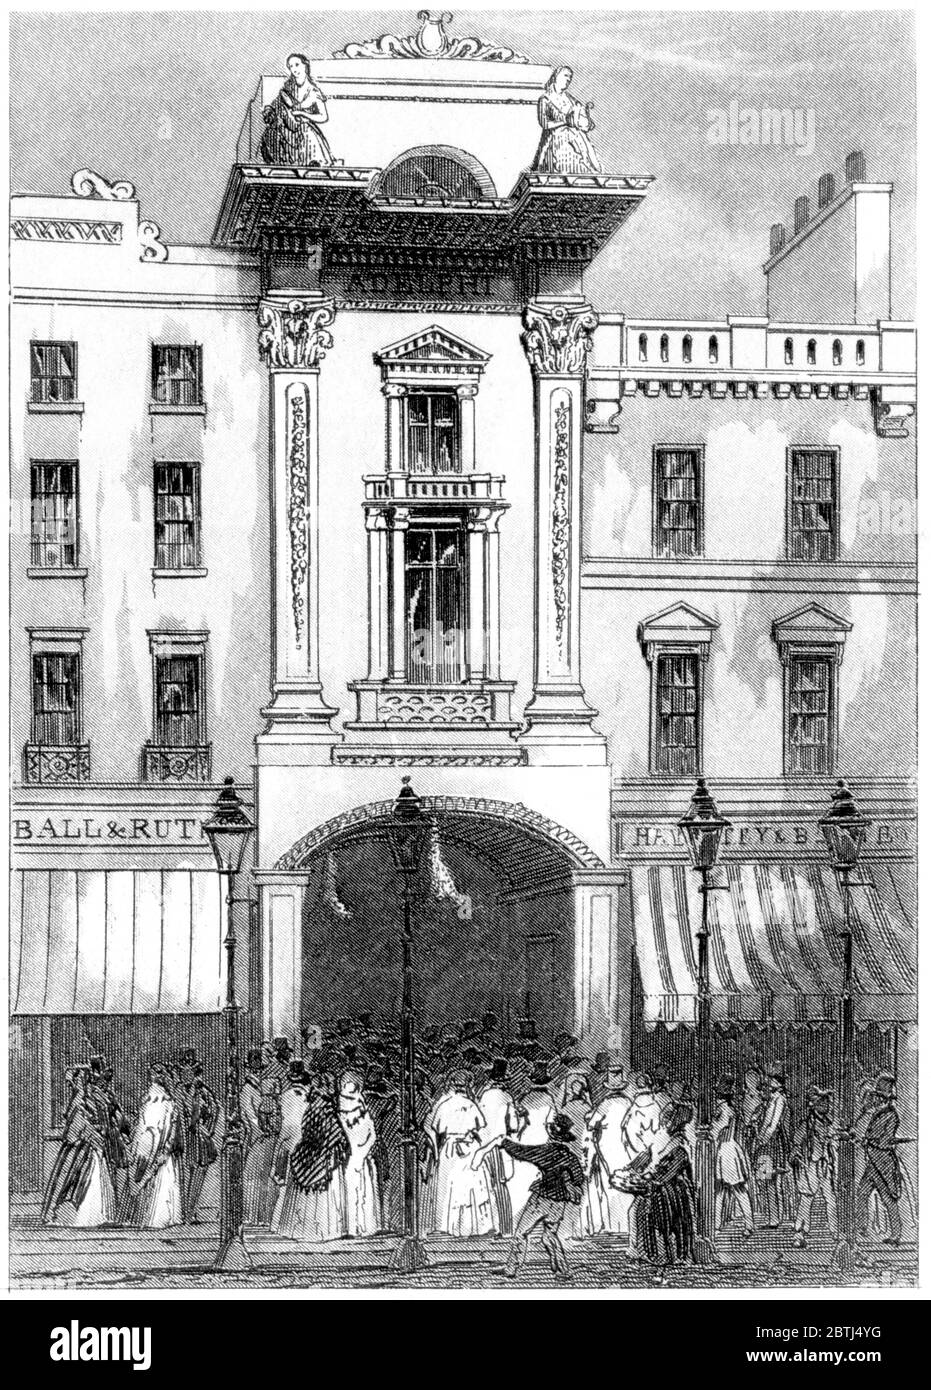 An engraving of The Adelphi Theatre London scanned at high resolution from a book printed in 1851. This image is believed to be free of all copyright. Stock Photo